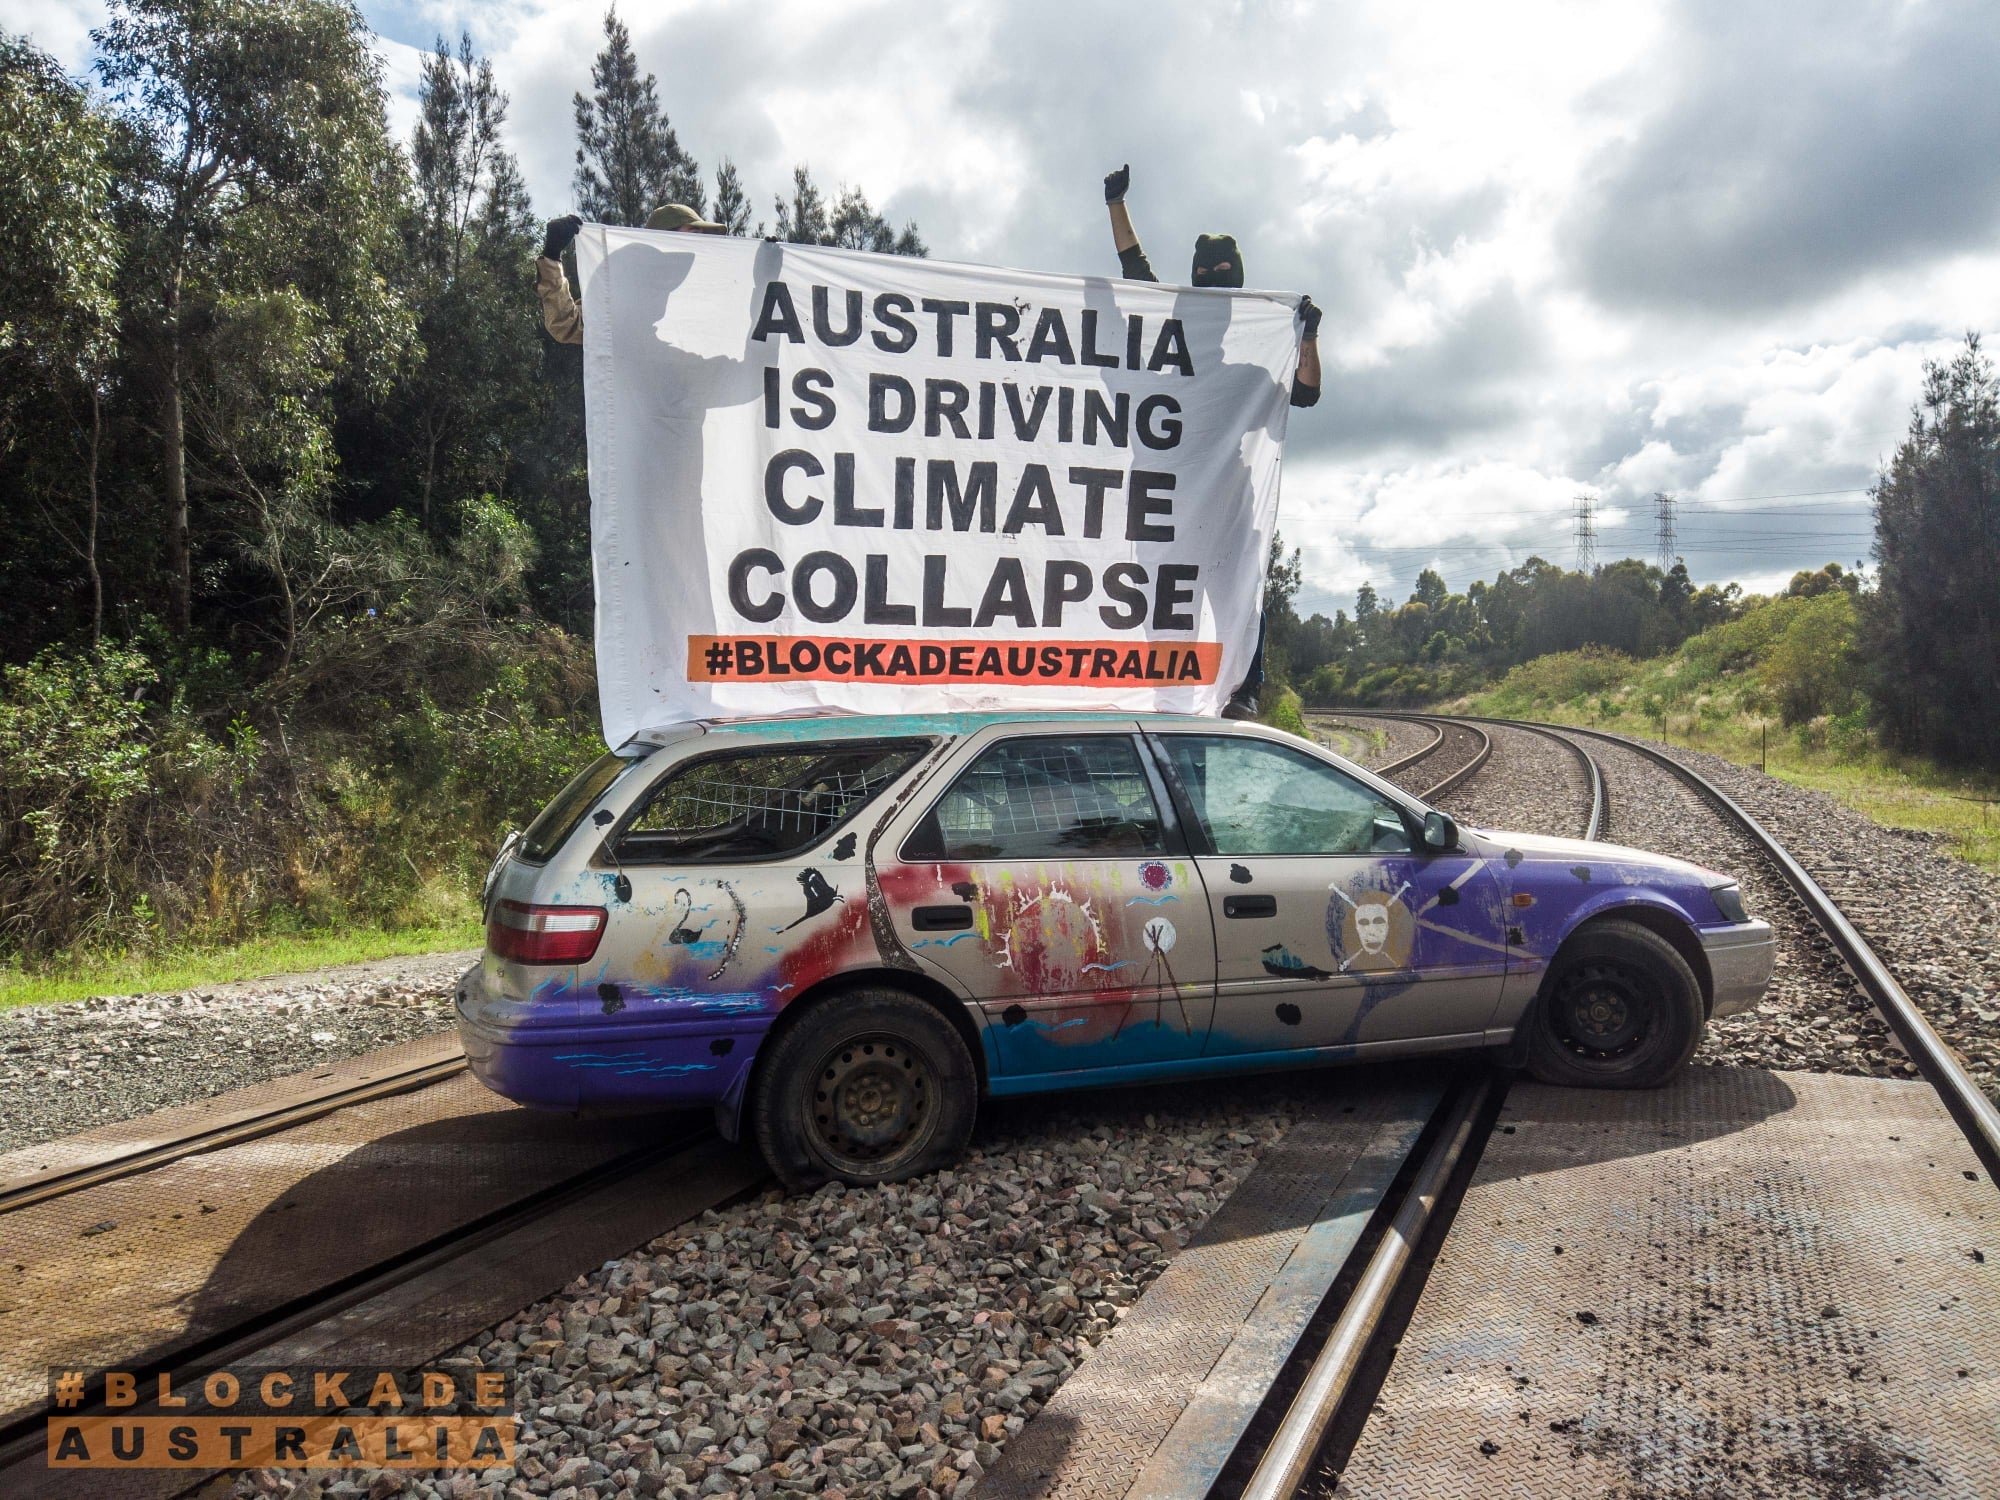 The car is blocking a railway line heading into the world’s largest coal port